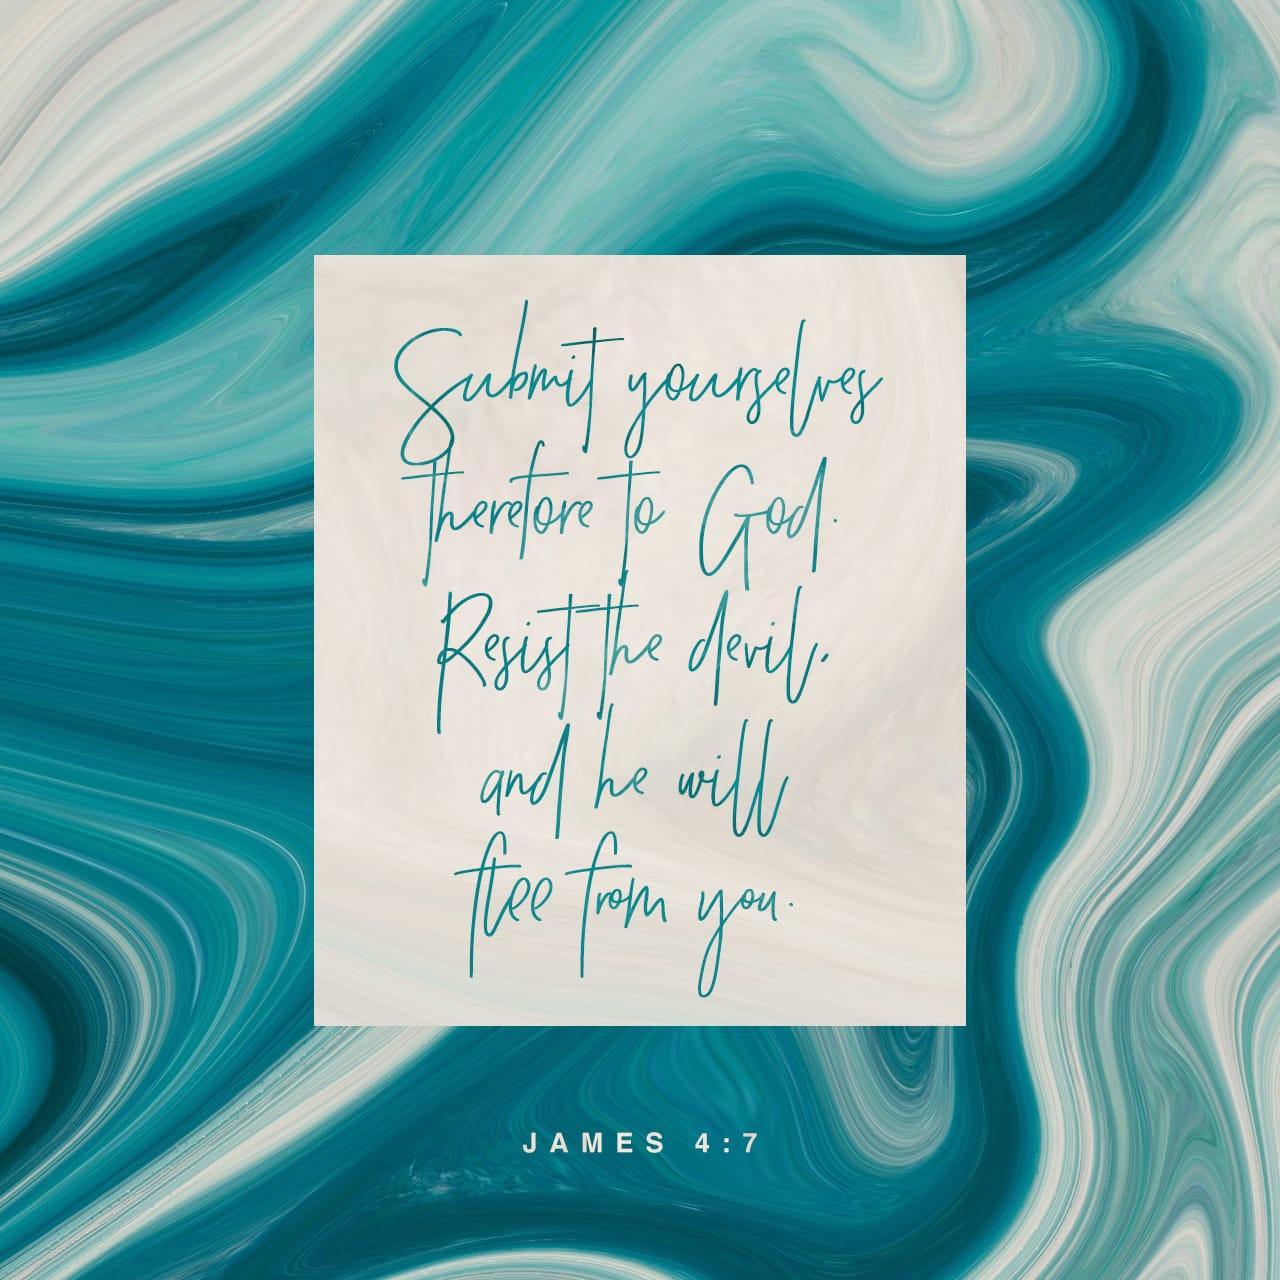 Bible Verse of the Day - day 149 - image 13741 (James 4:7)